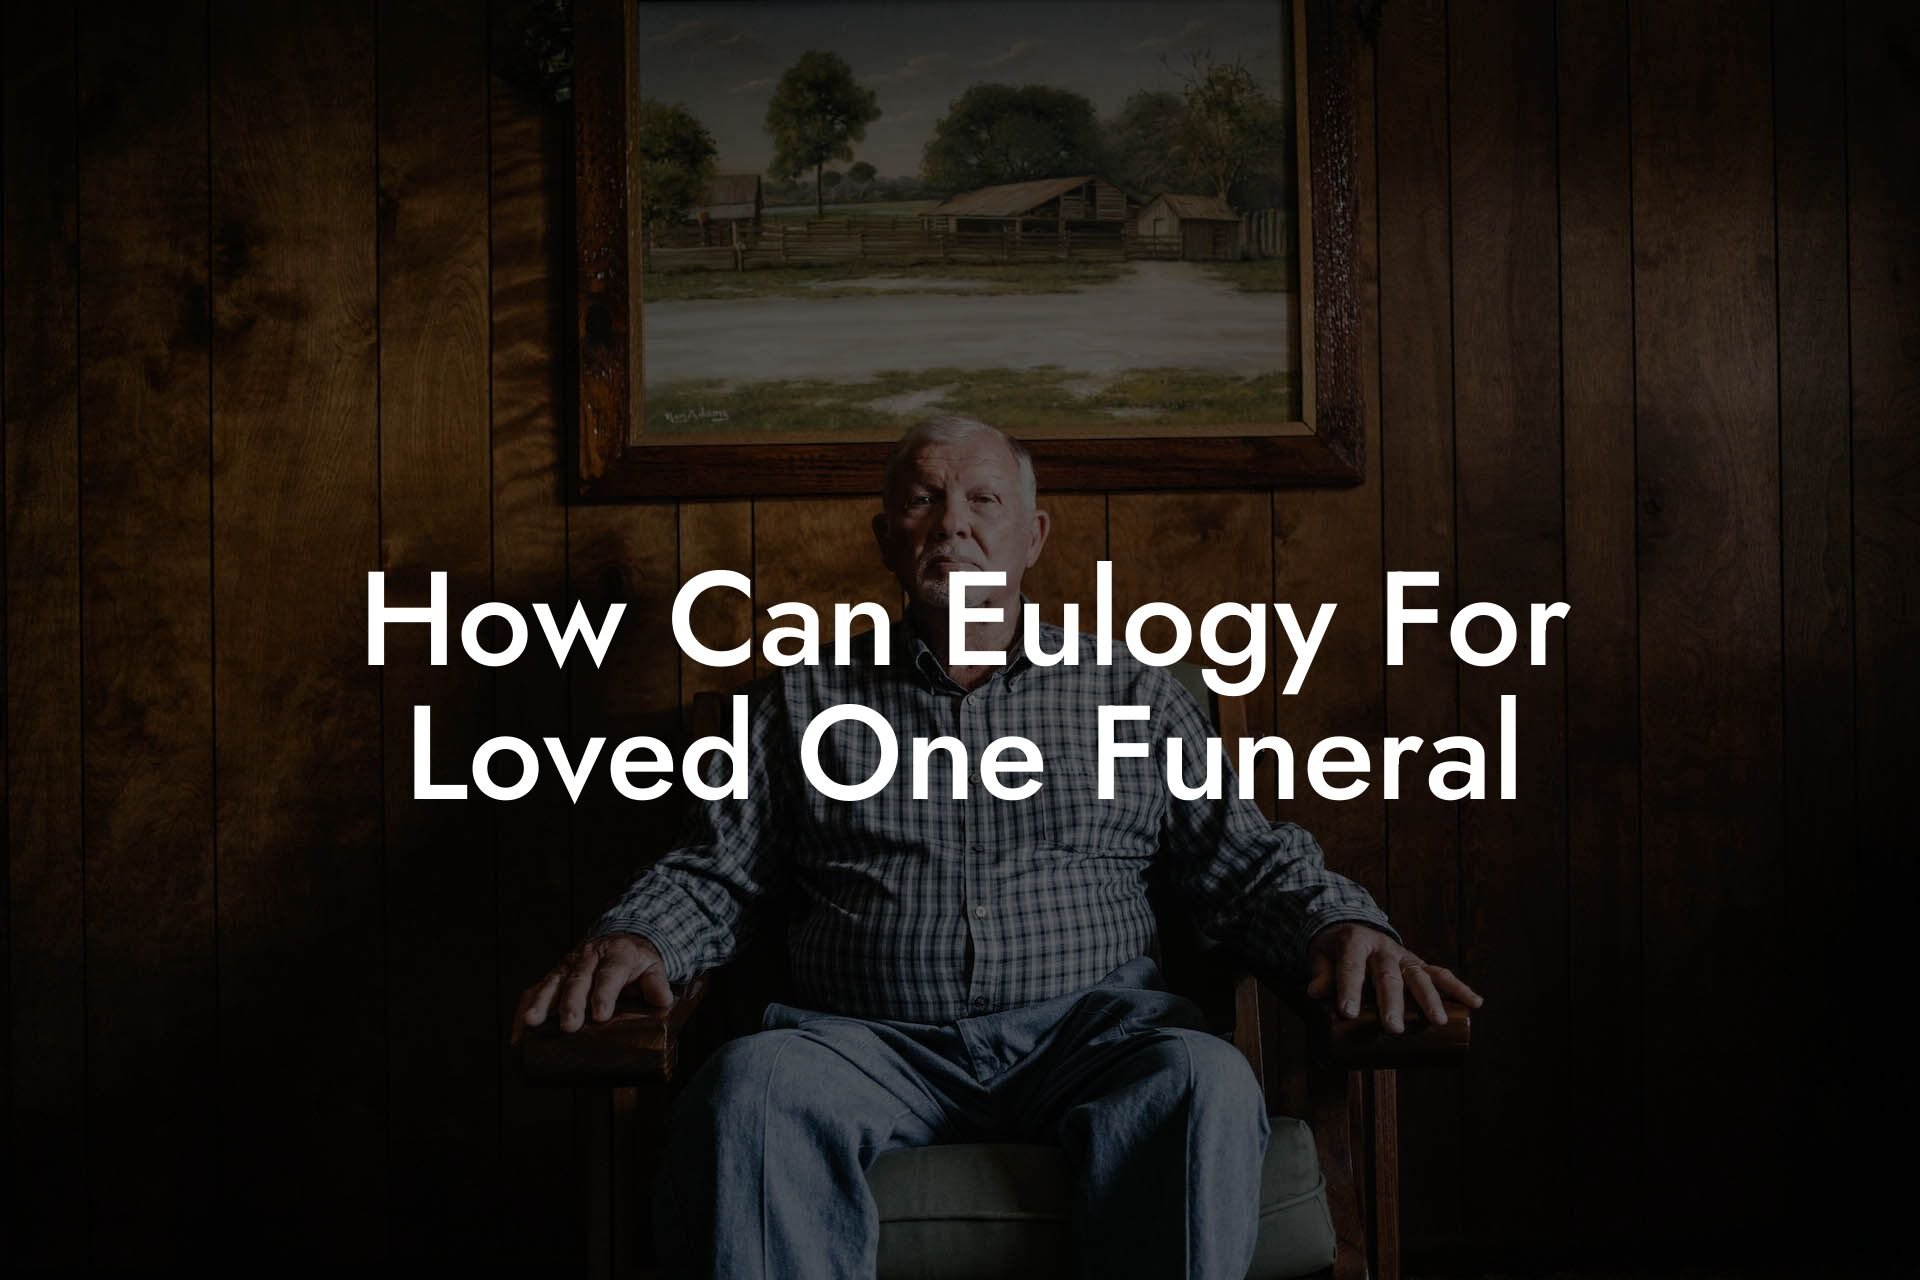 How Can Eulogy For Loved One Funeral